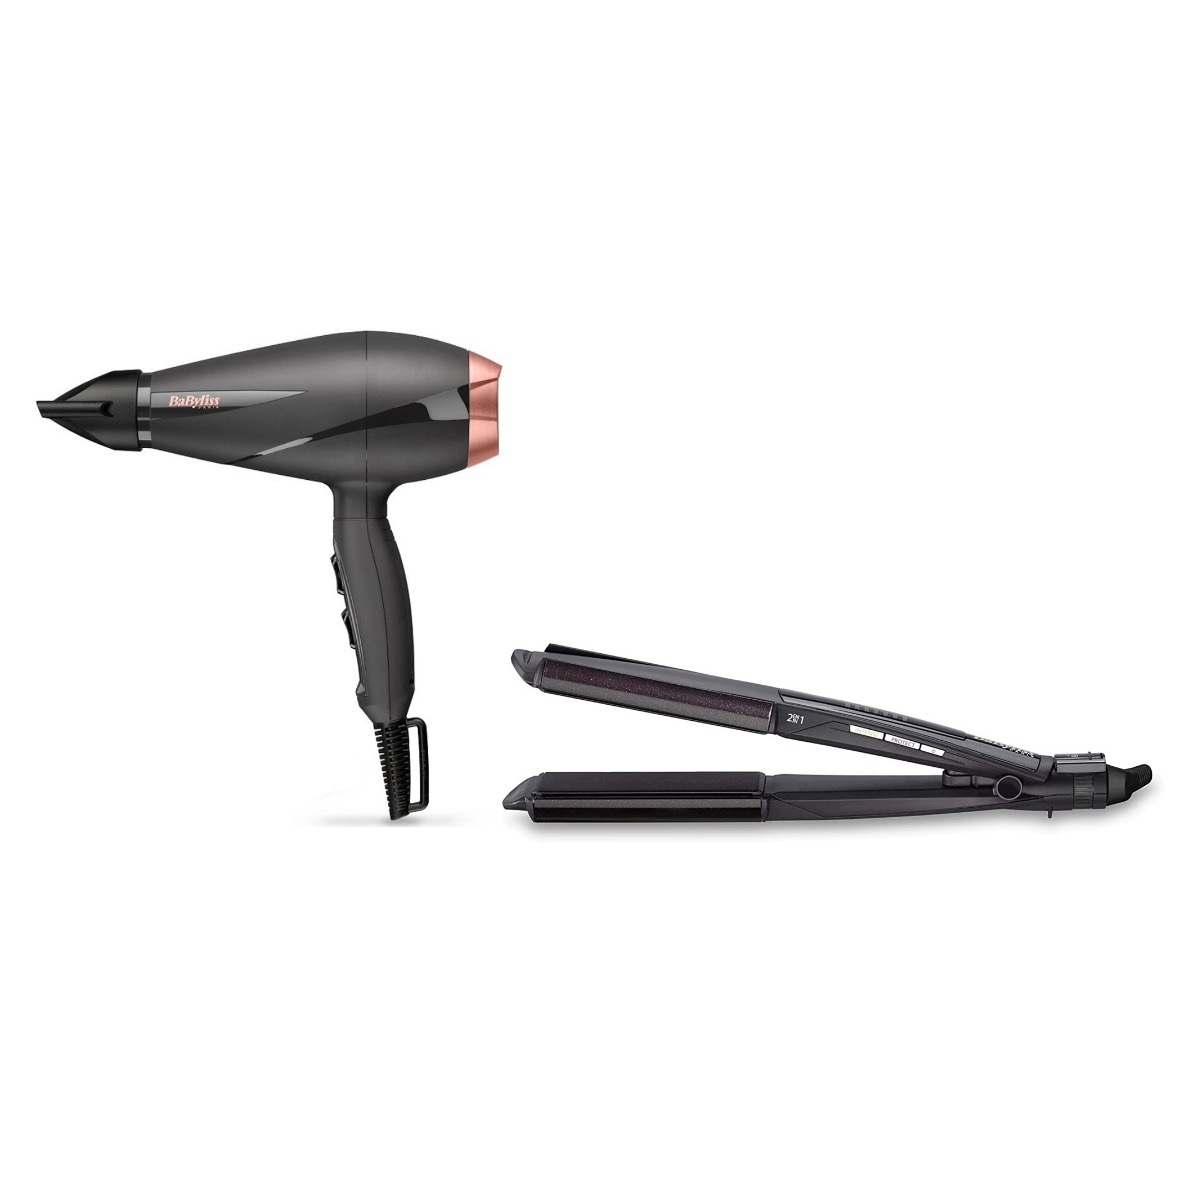 Babyliss Smooth Pro Hair Dryer, 2100 Watt, Black Rose Gold - 6709DE with Babyliss 2 in 1 Wet and Dry Hair Curler and Straightener, Black - ST330E